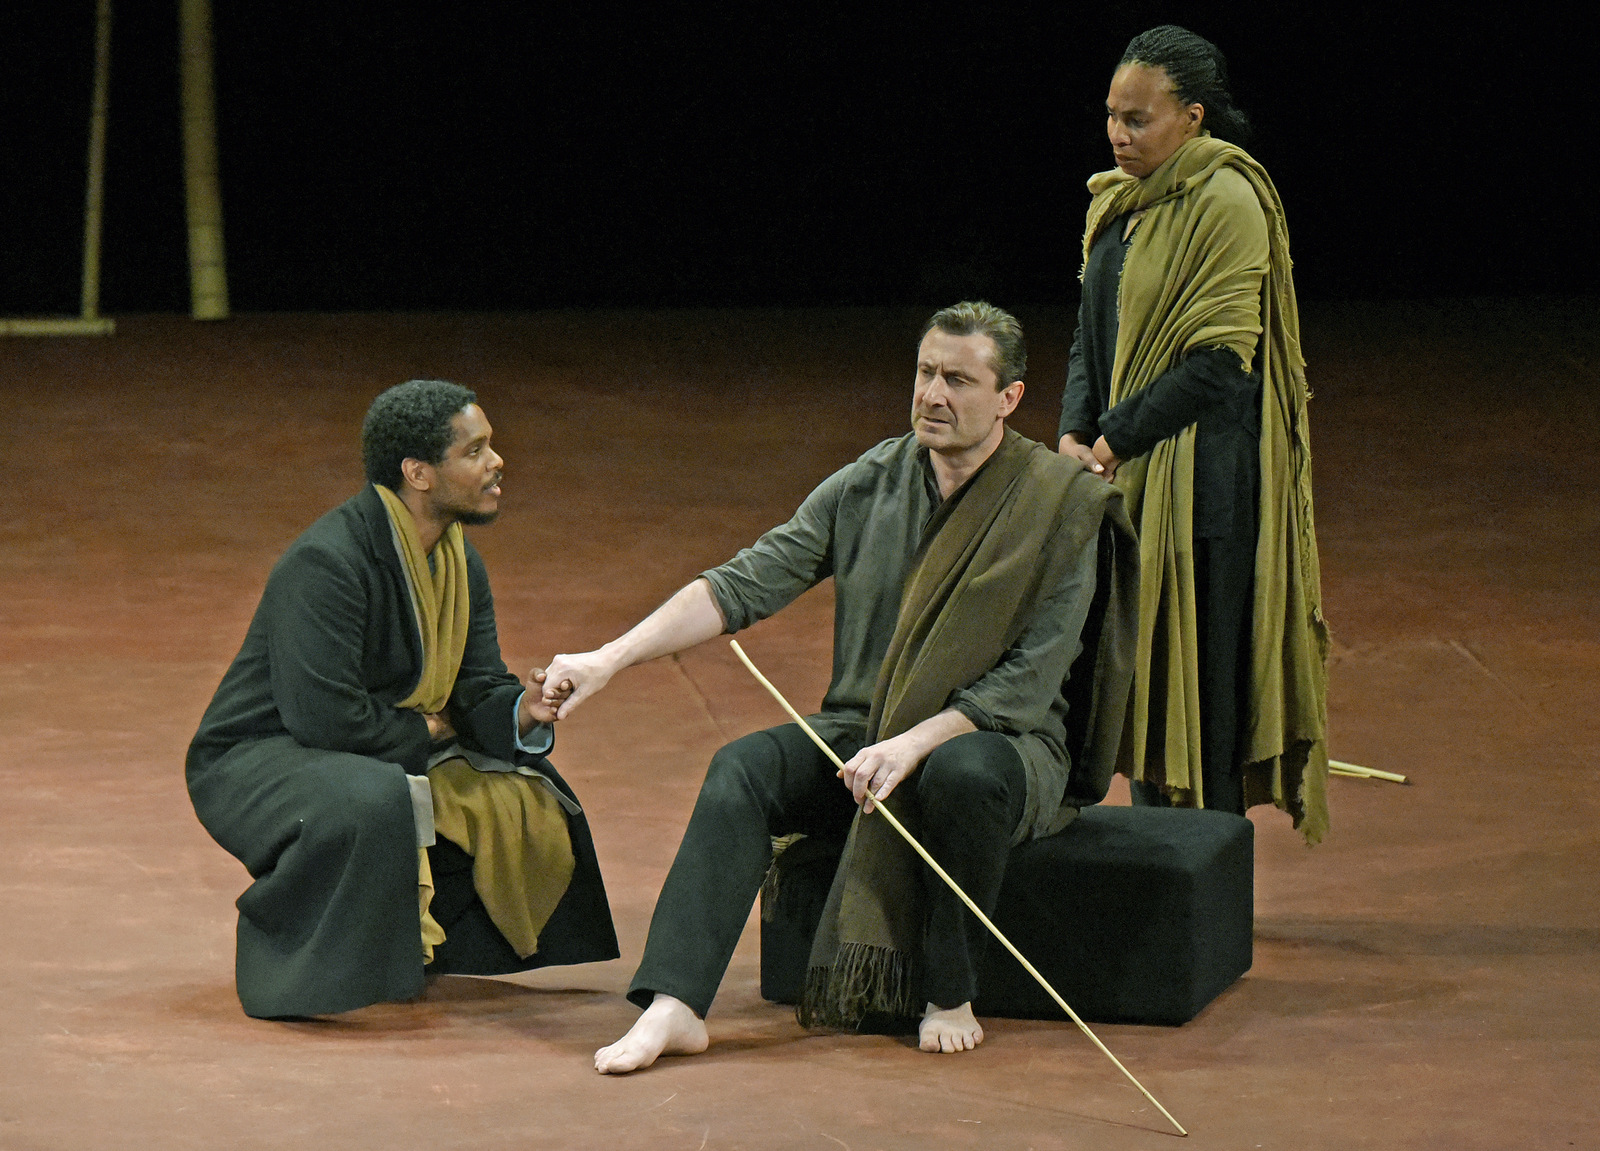 Battlefield. Directed by Peter Brook. Pictured: Jared McNeill, Sean O'Callaghan and Karen Aldridge. Photo credit: Kevin Parry for The Wallis.